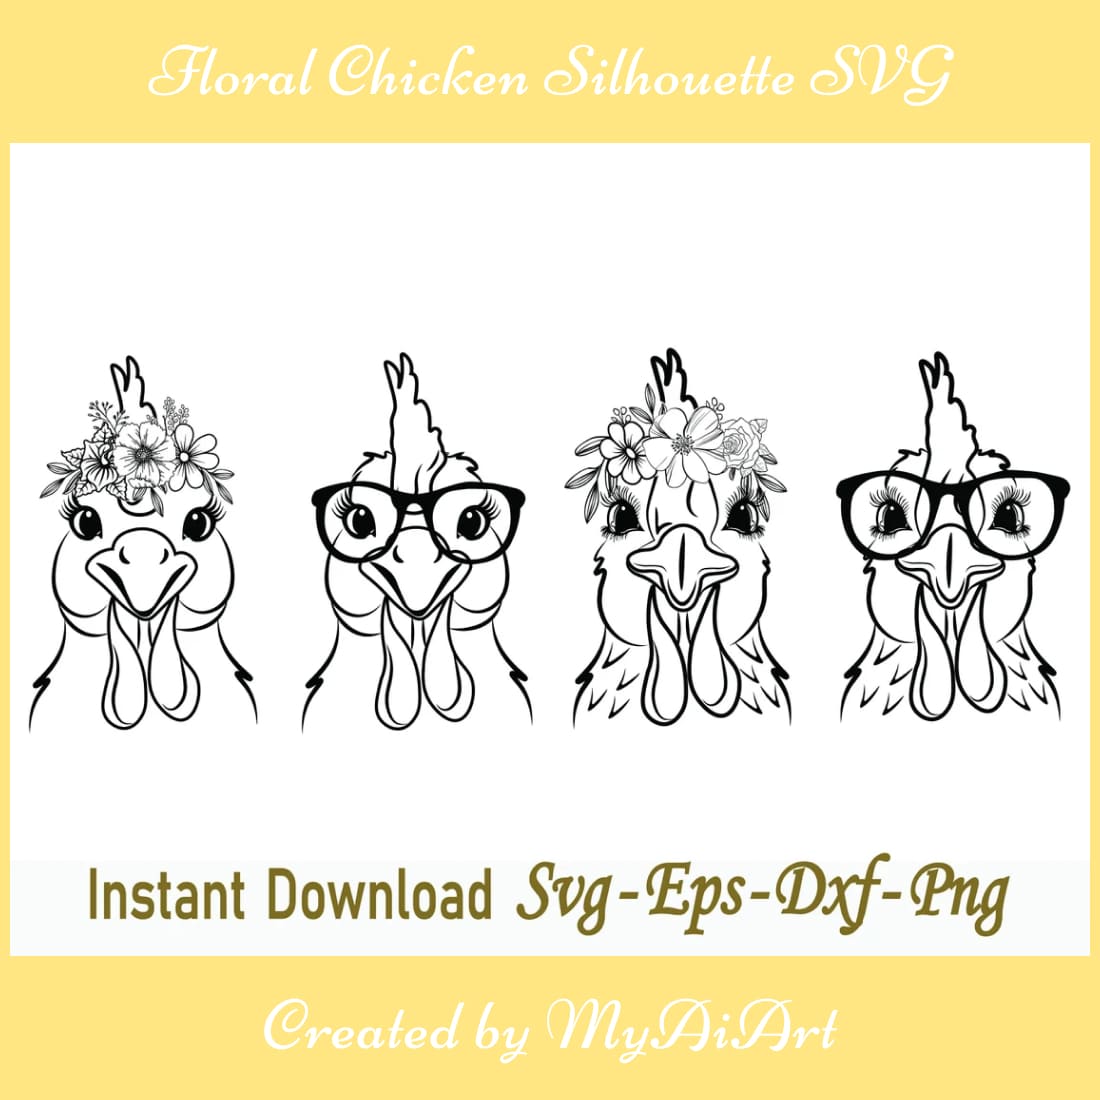 floral chicken silhouette svg cover image.